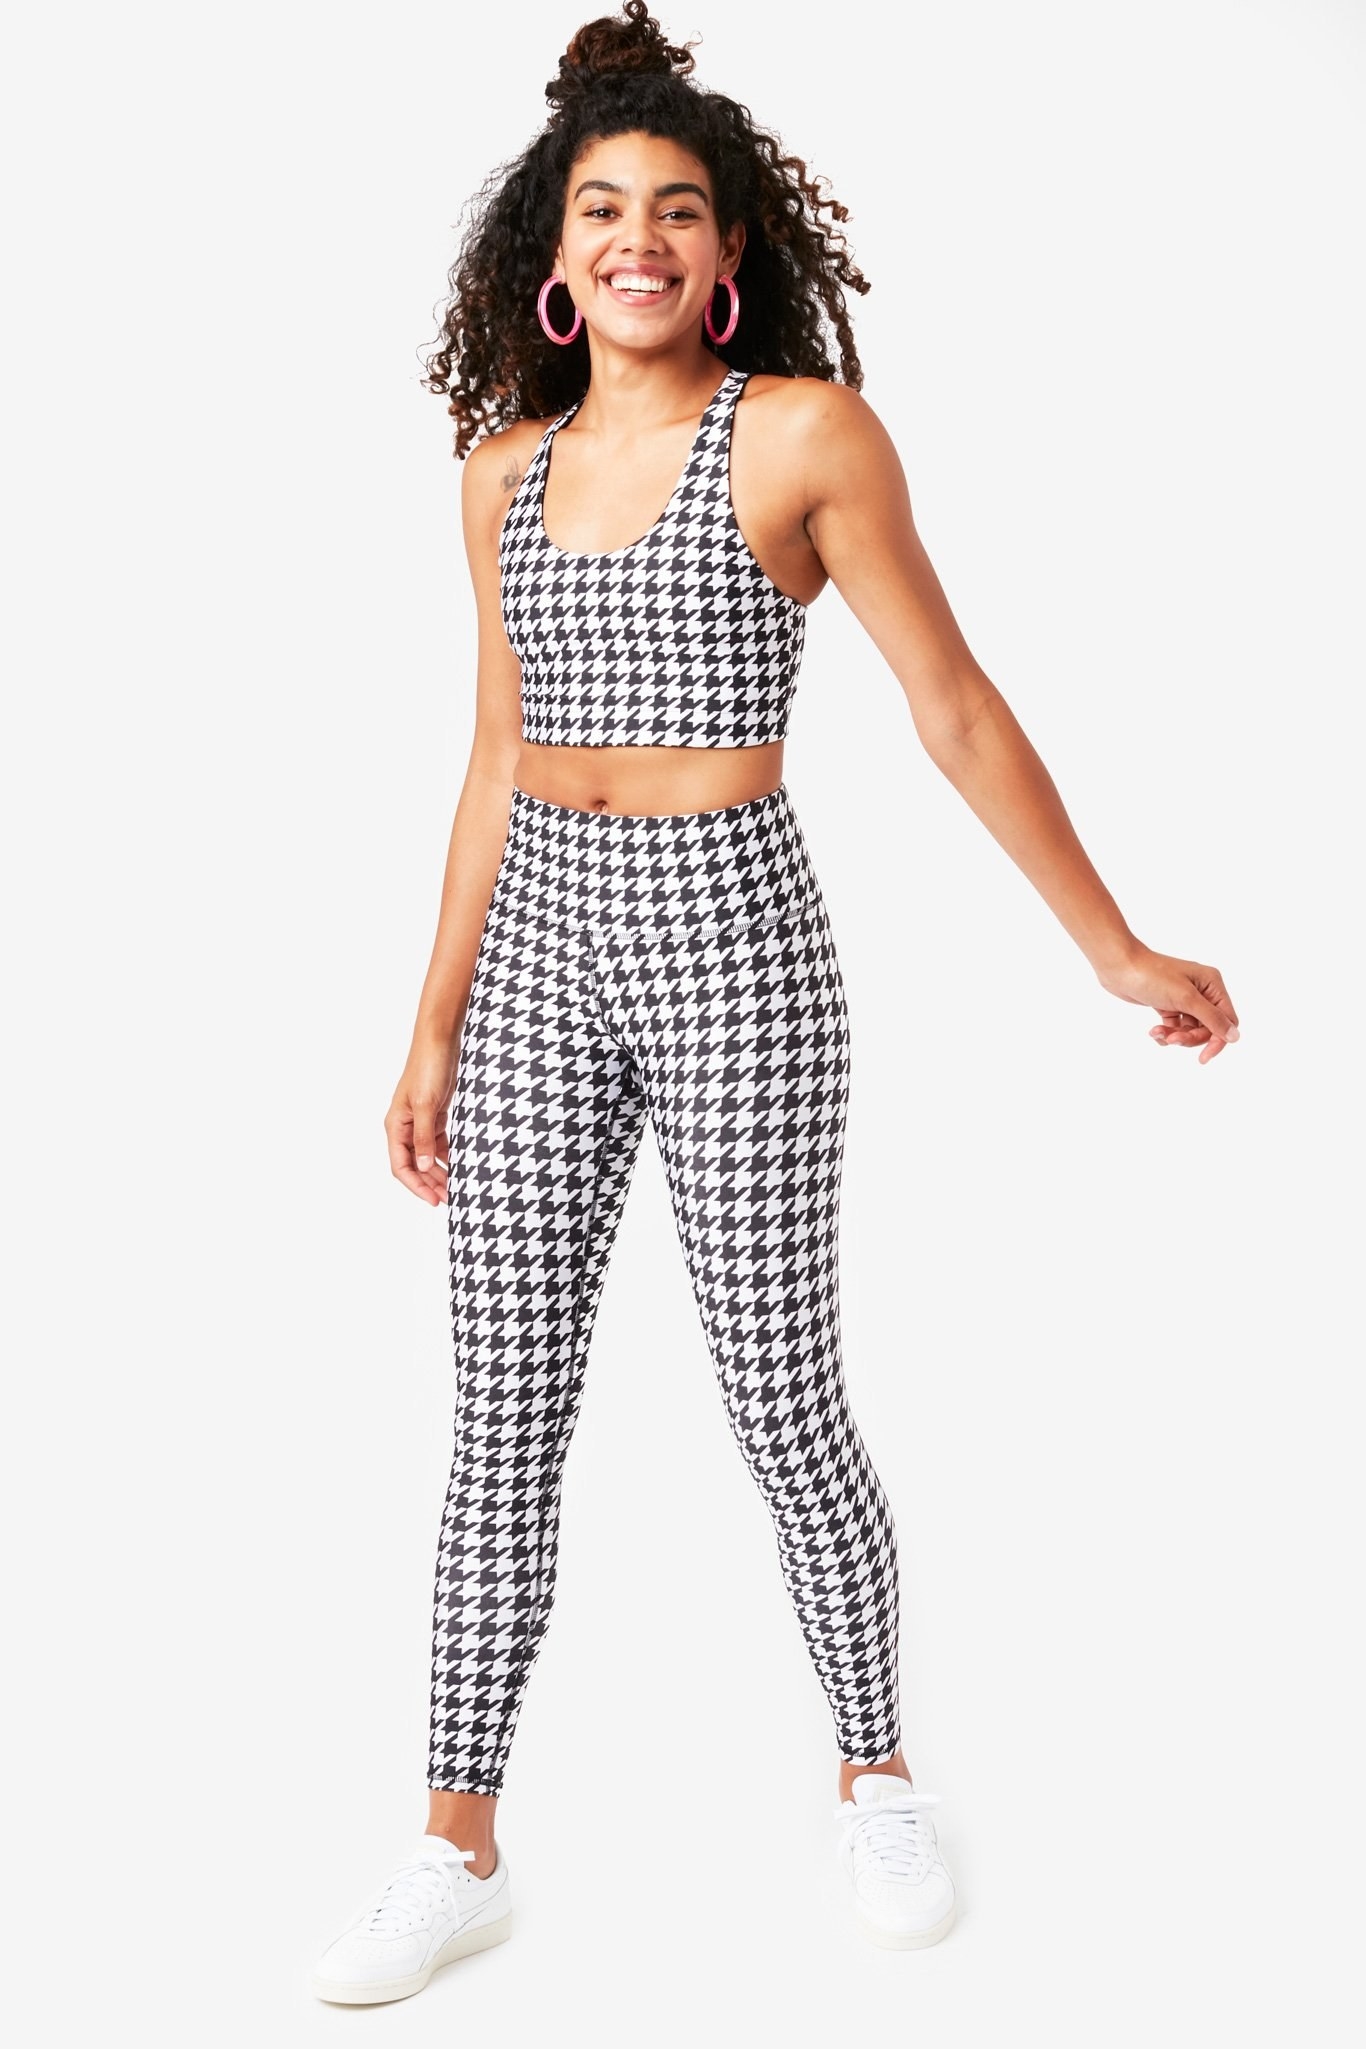 model wearing the sports bra and leggings in black and white houndstooth pattern